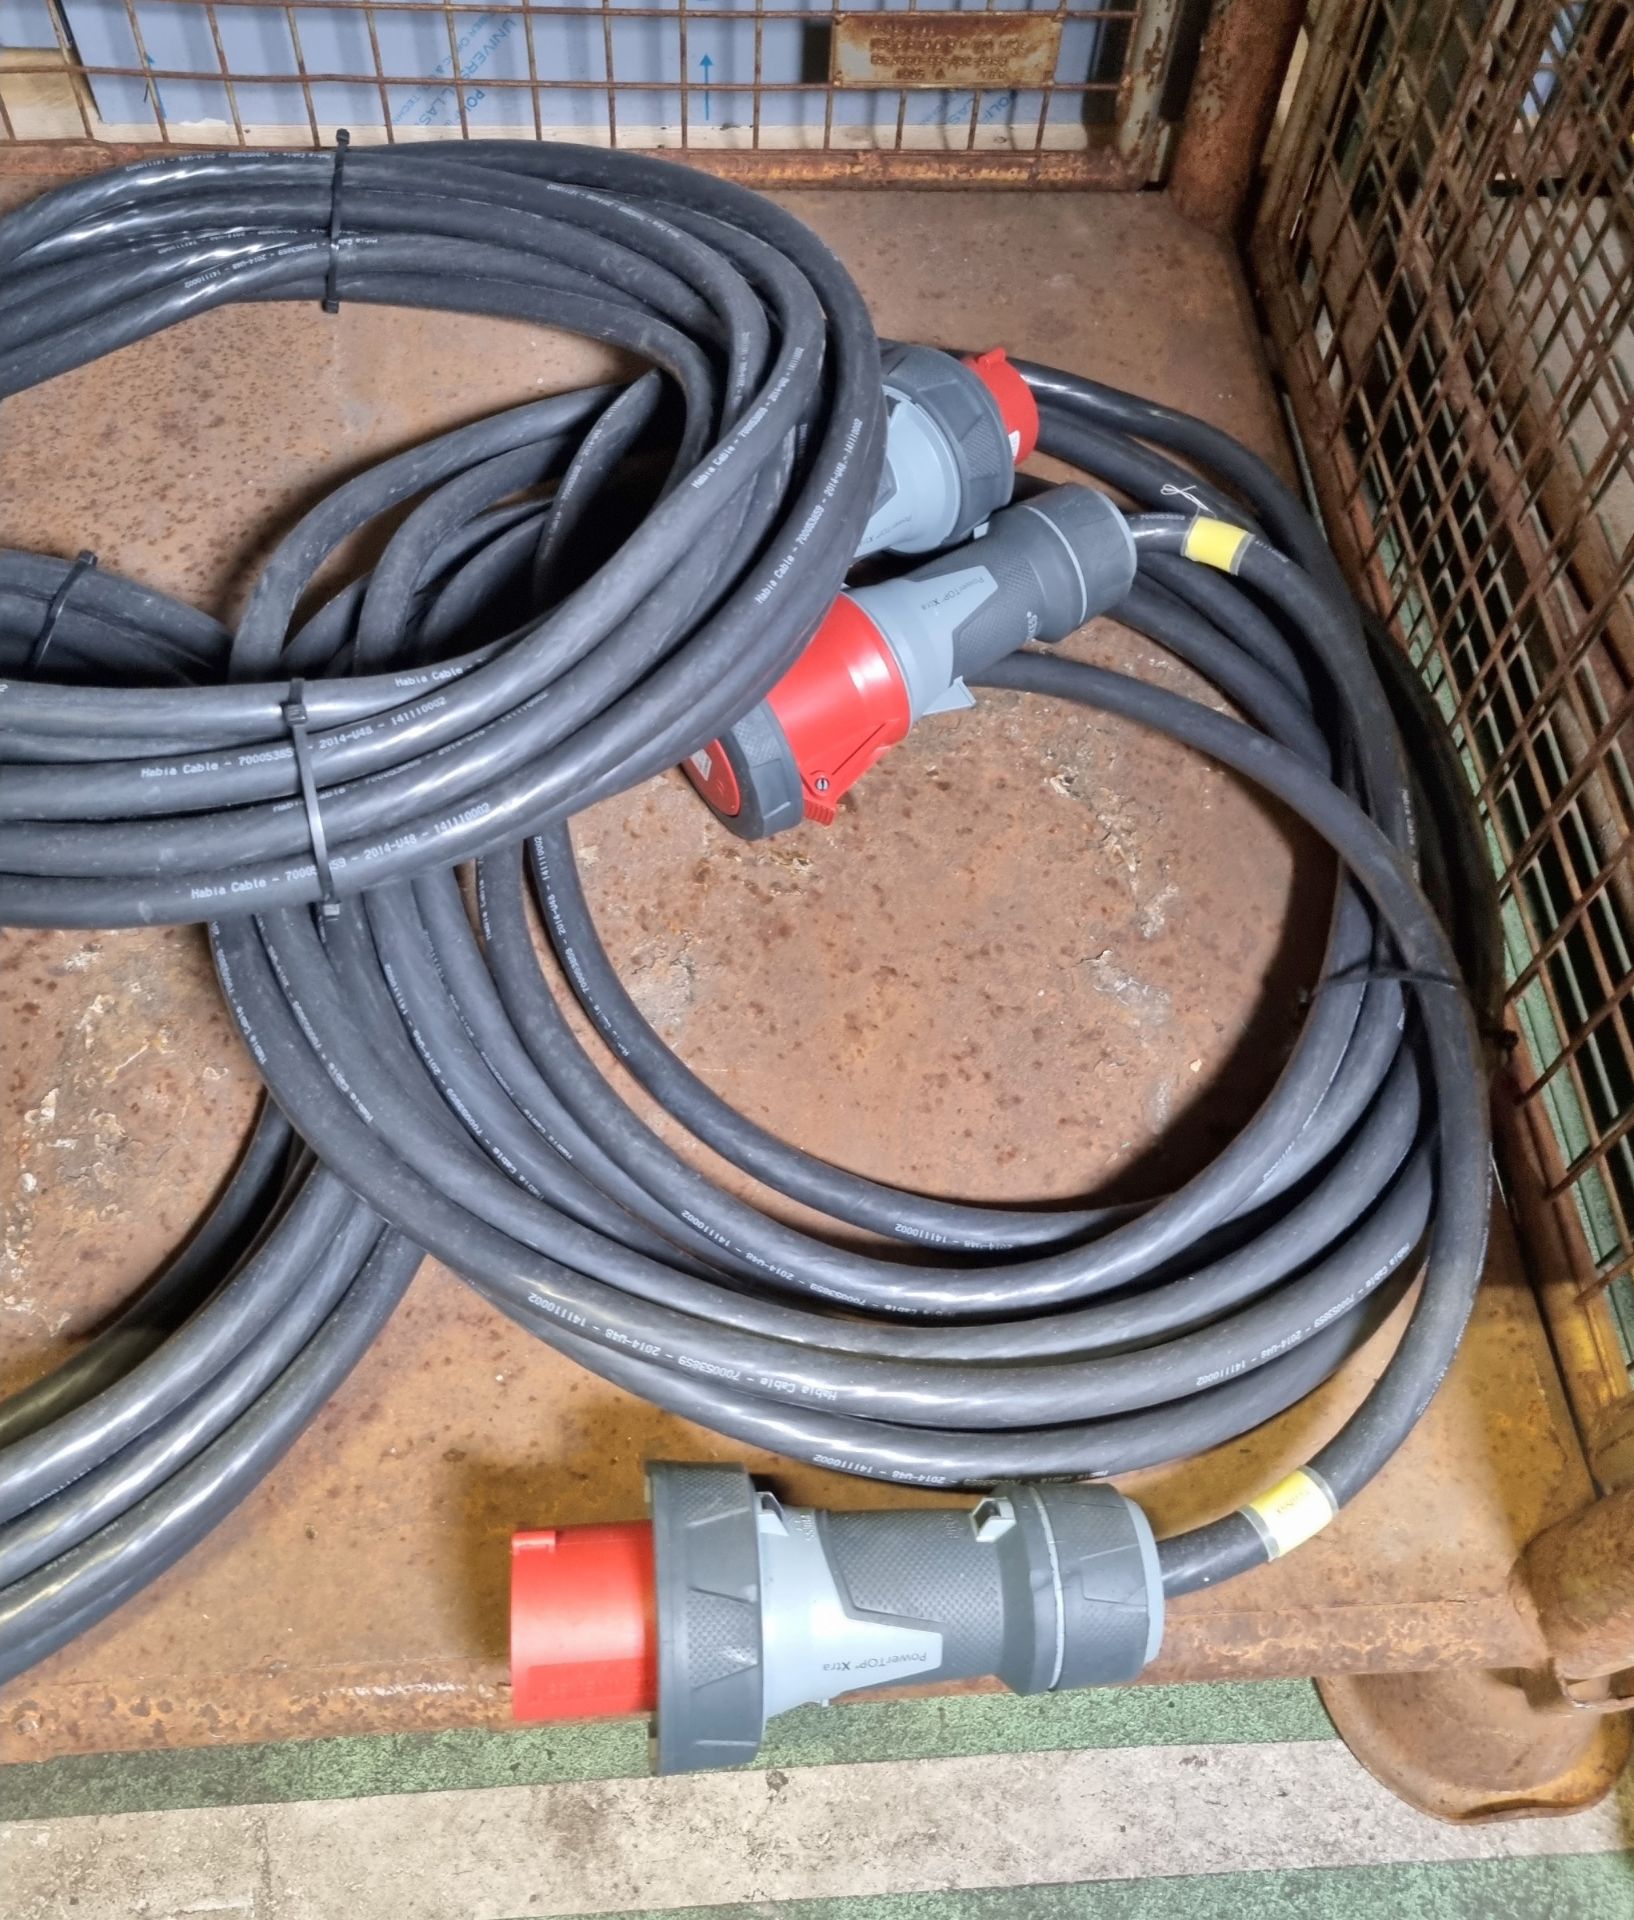 3x Mennekes 125a 400vac 3 Phase Power Harness heavy duty cables 10m - Image 2 of 5